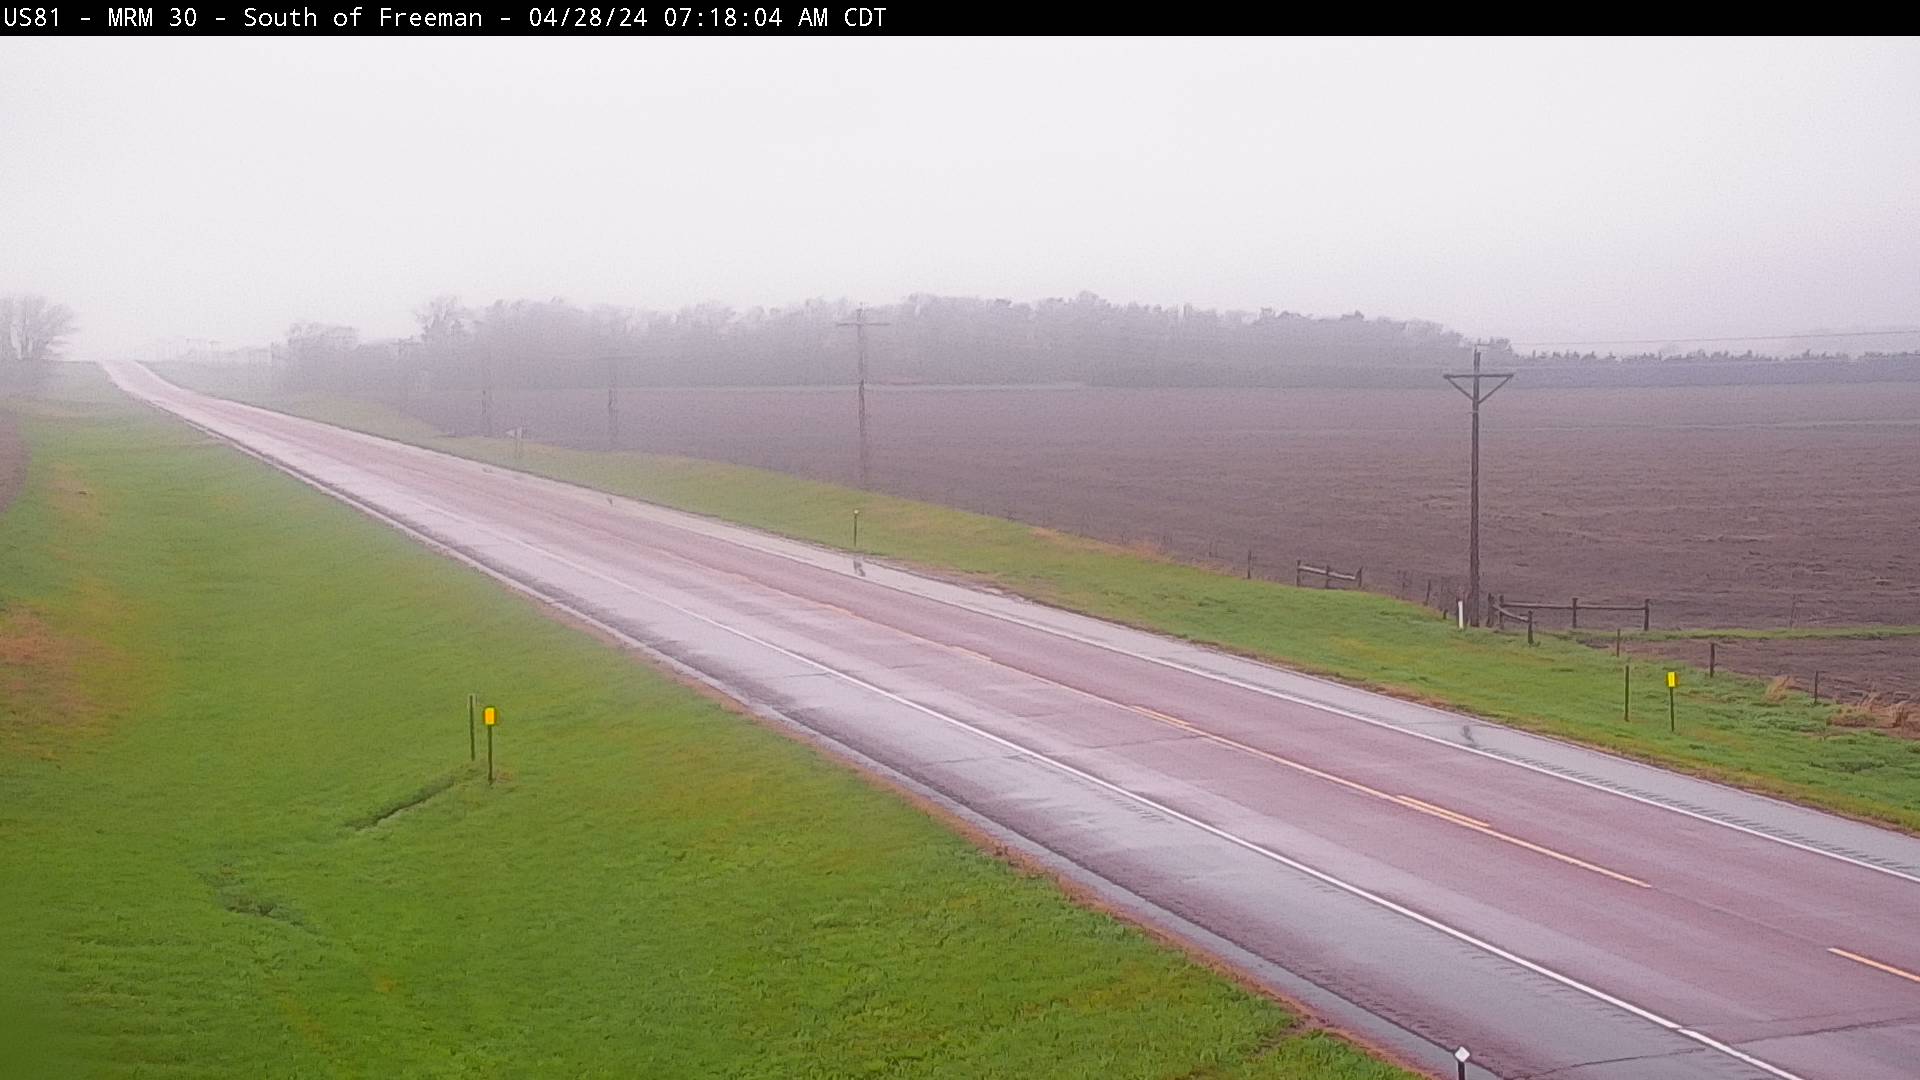 Traffic Cam 4 miles south of town along US-81 @ MP 30 - South Player